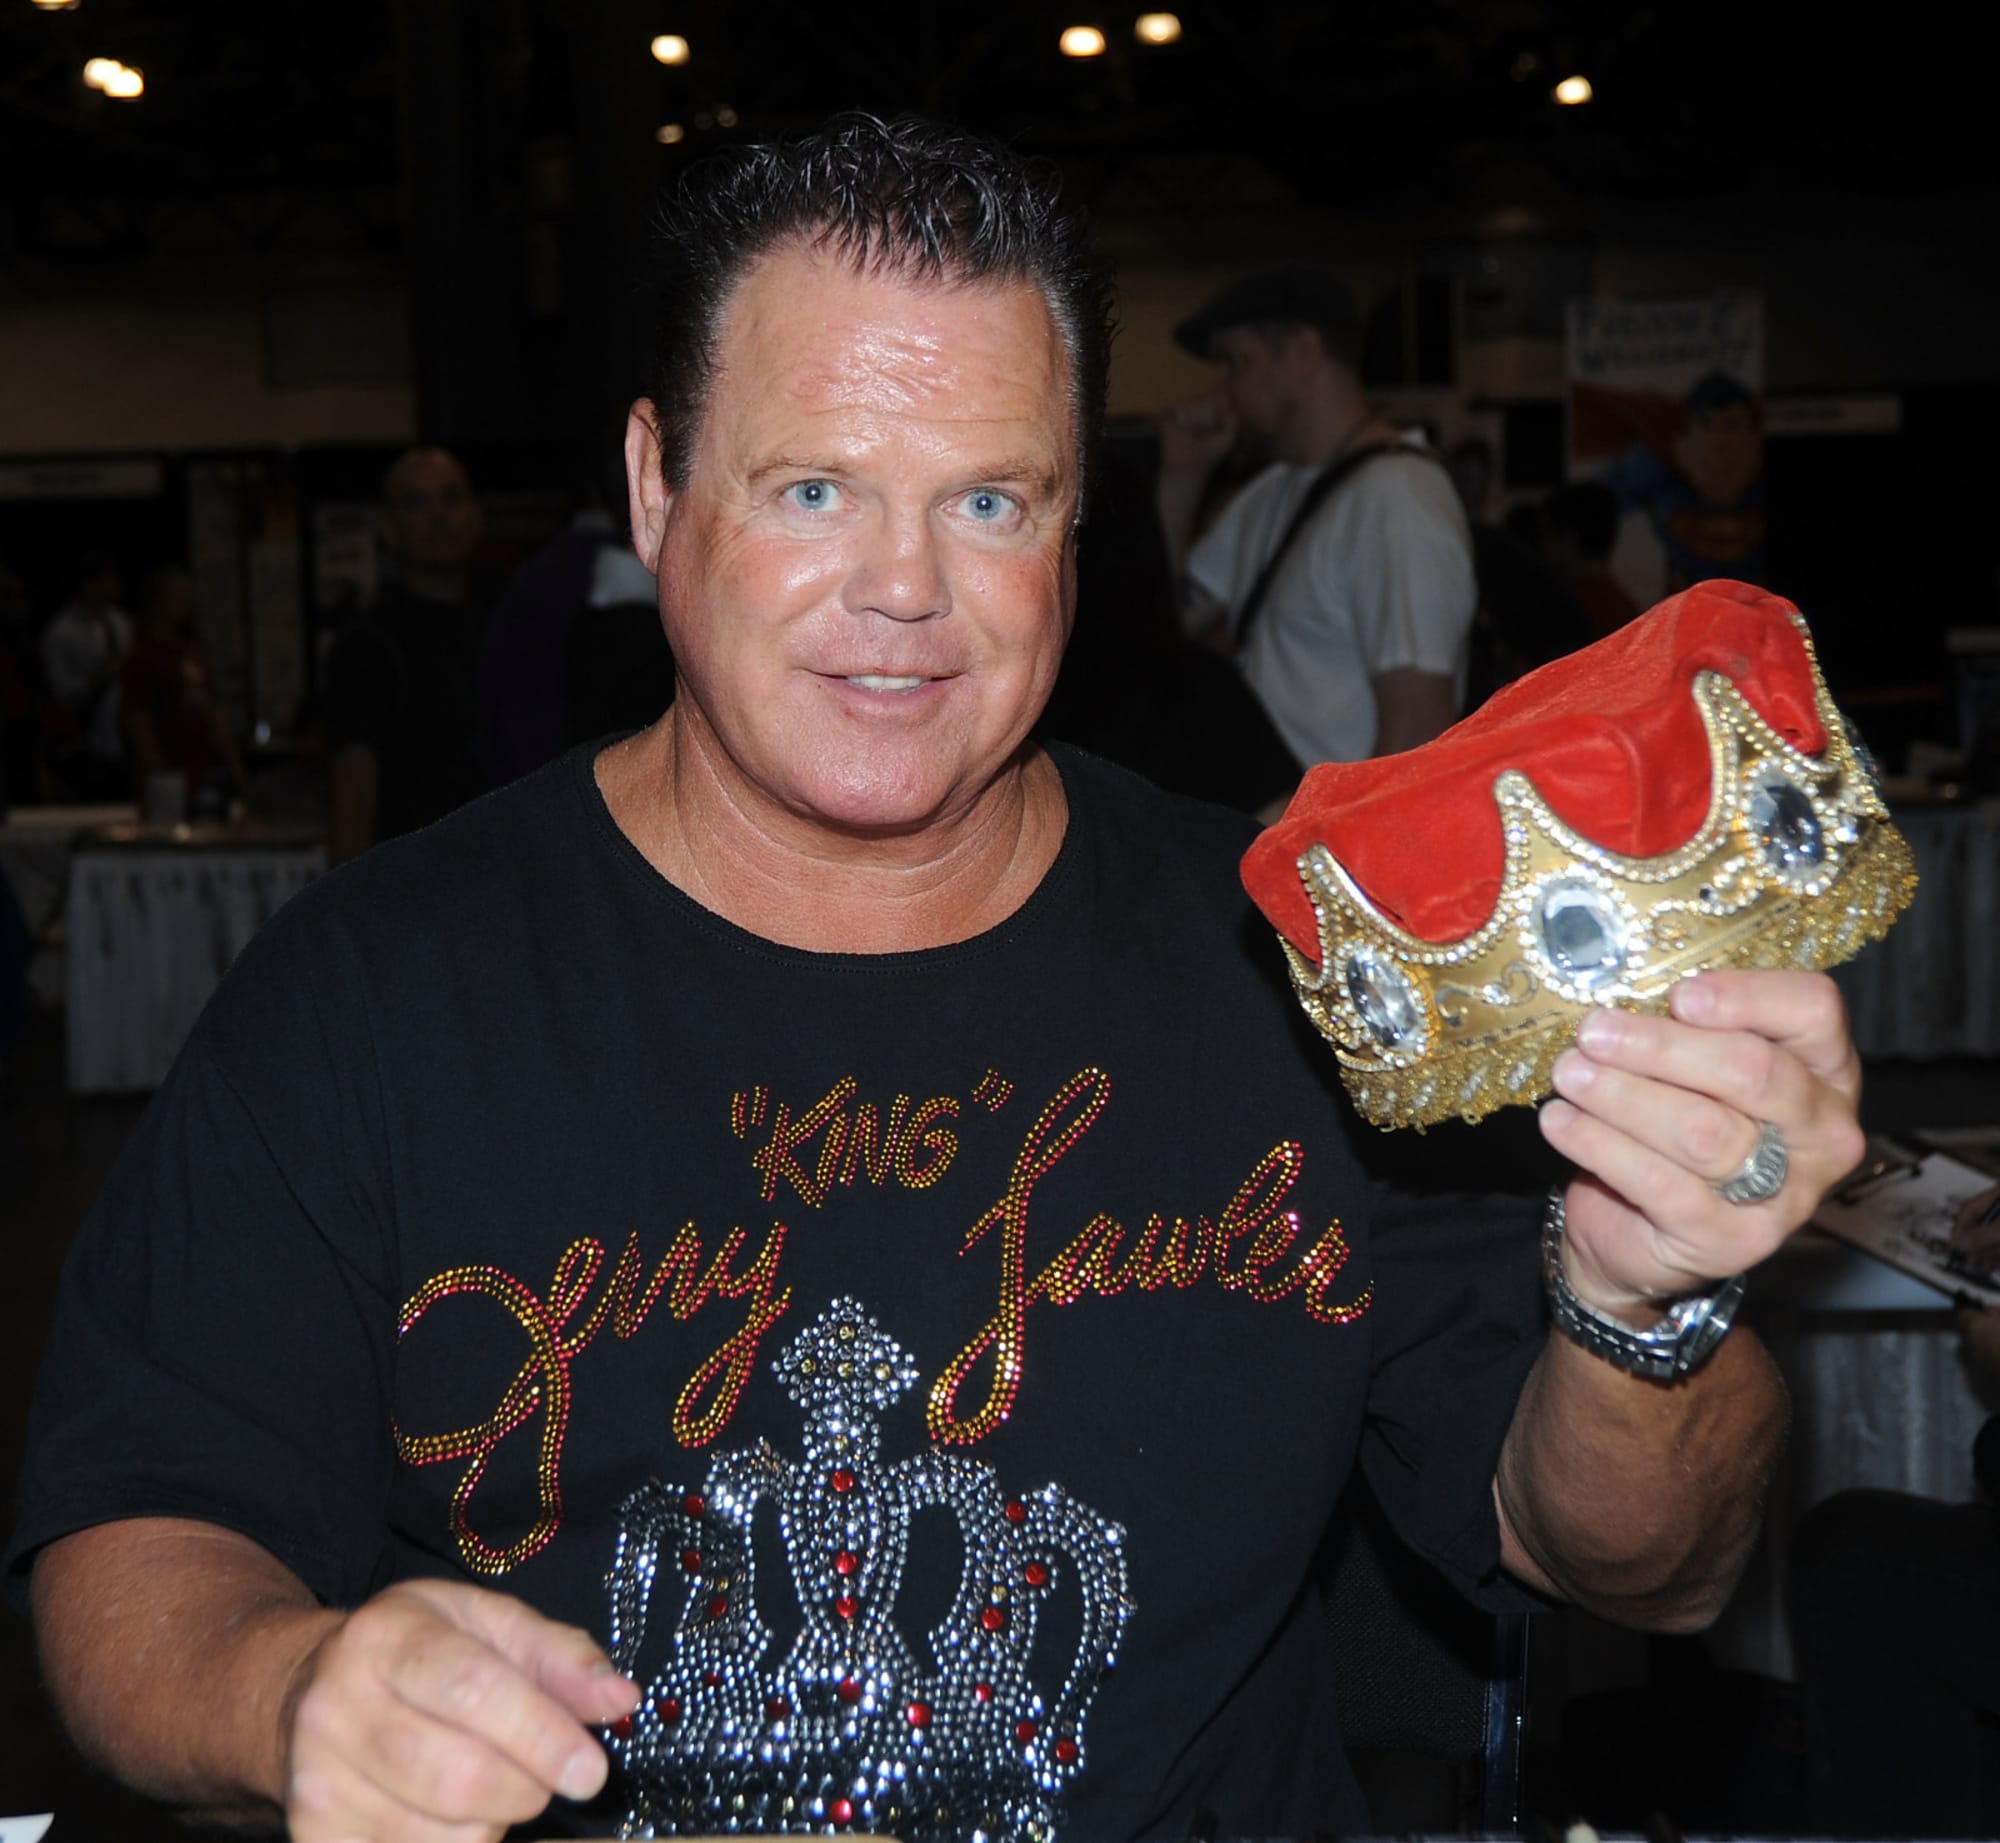 WWE RAW: Jerry Lawler should be removed for his racist commentary